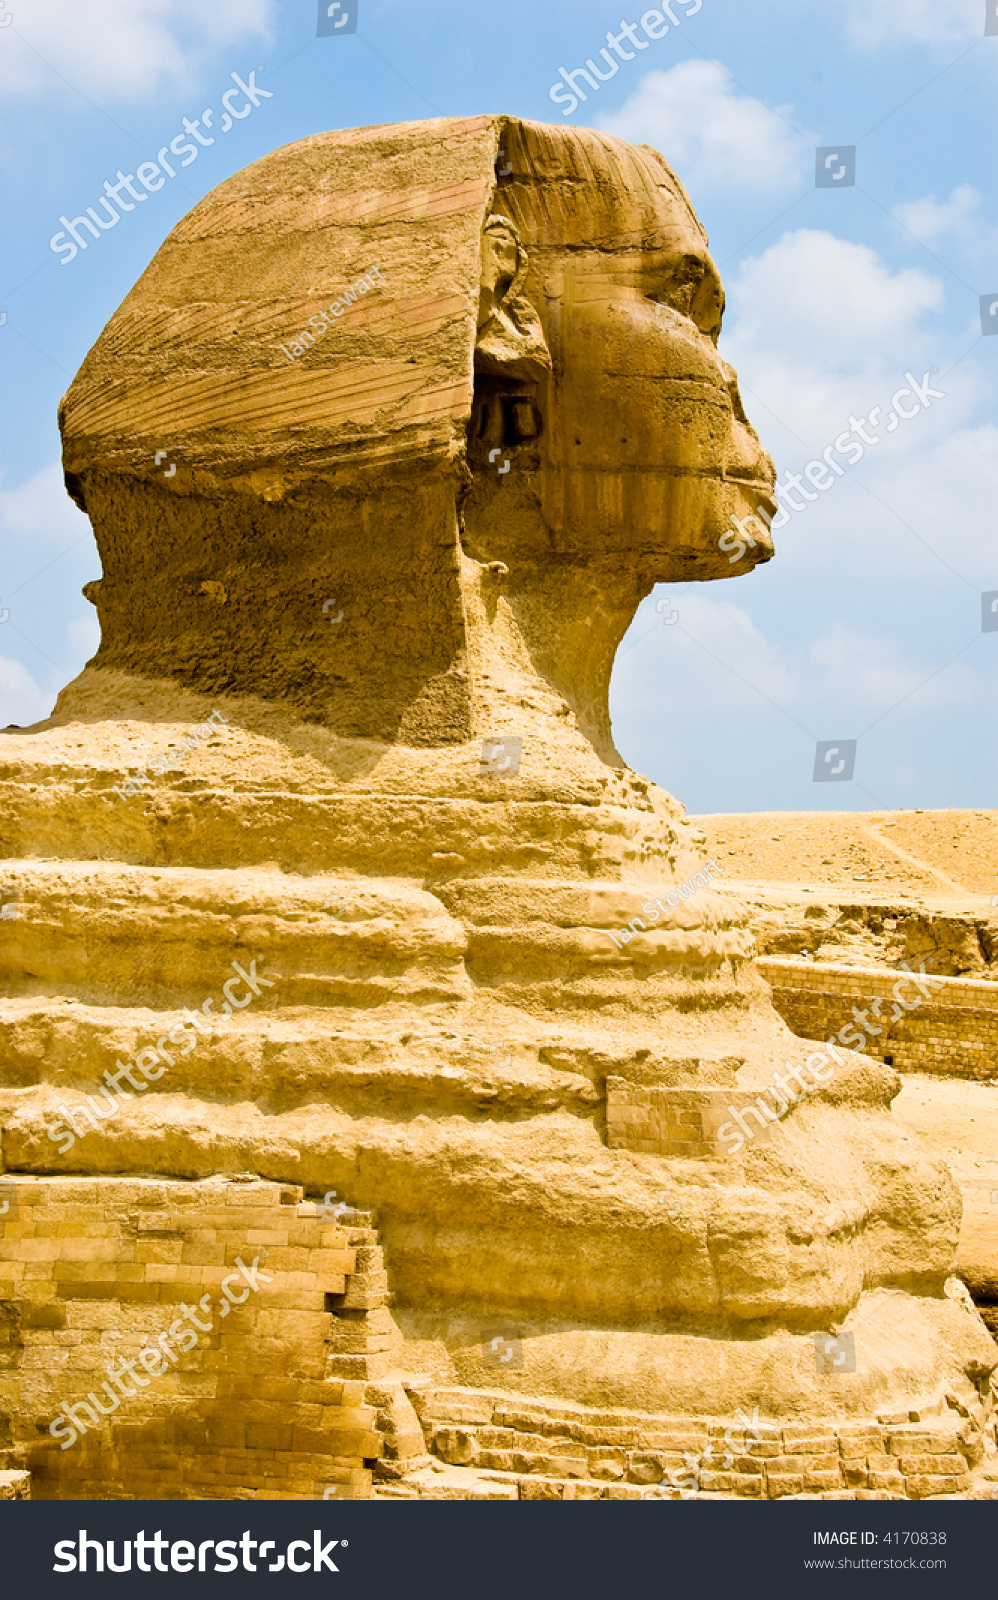 A Close Up Of The Sphinx Stock Photo 4170838 : Shutterstock